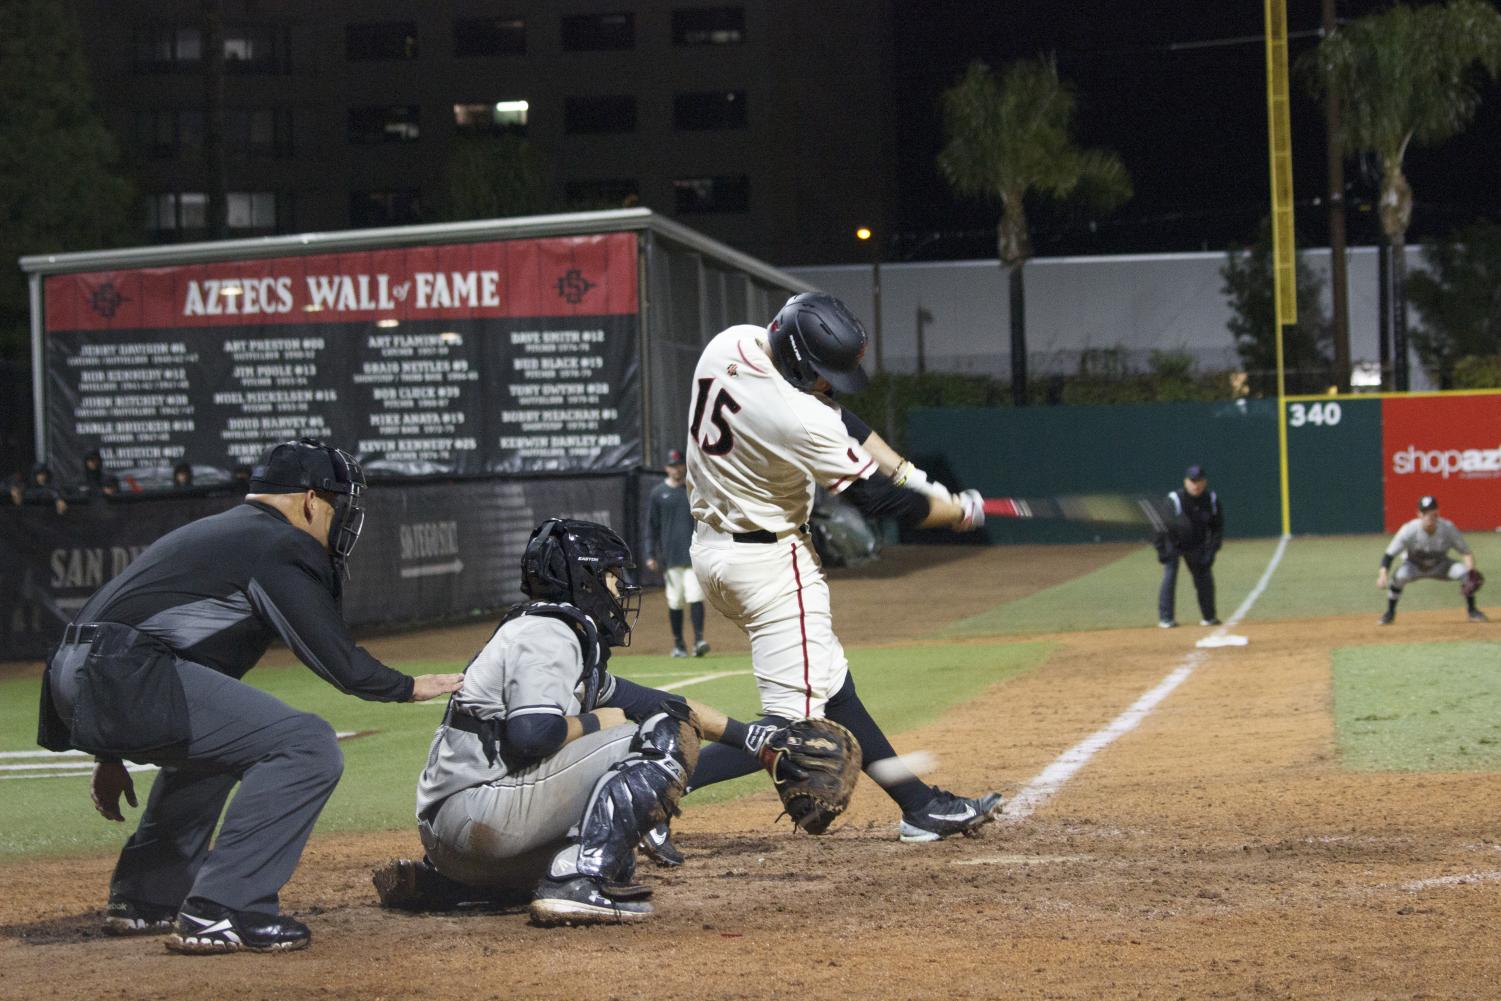 San Diego State baseball wins second game in the weekend series vs